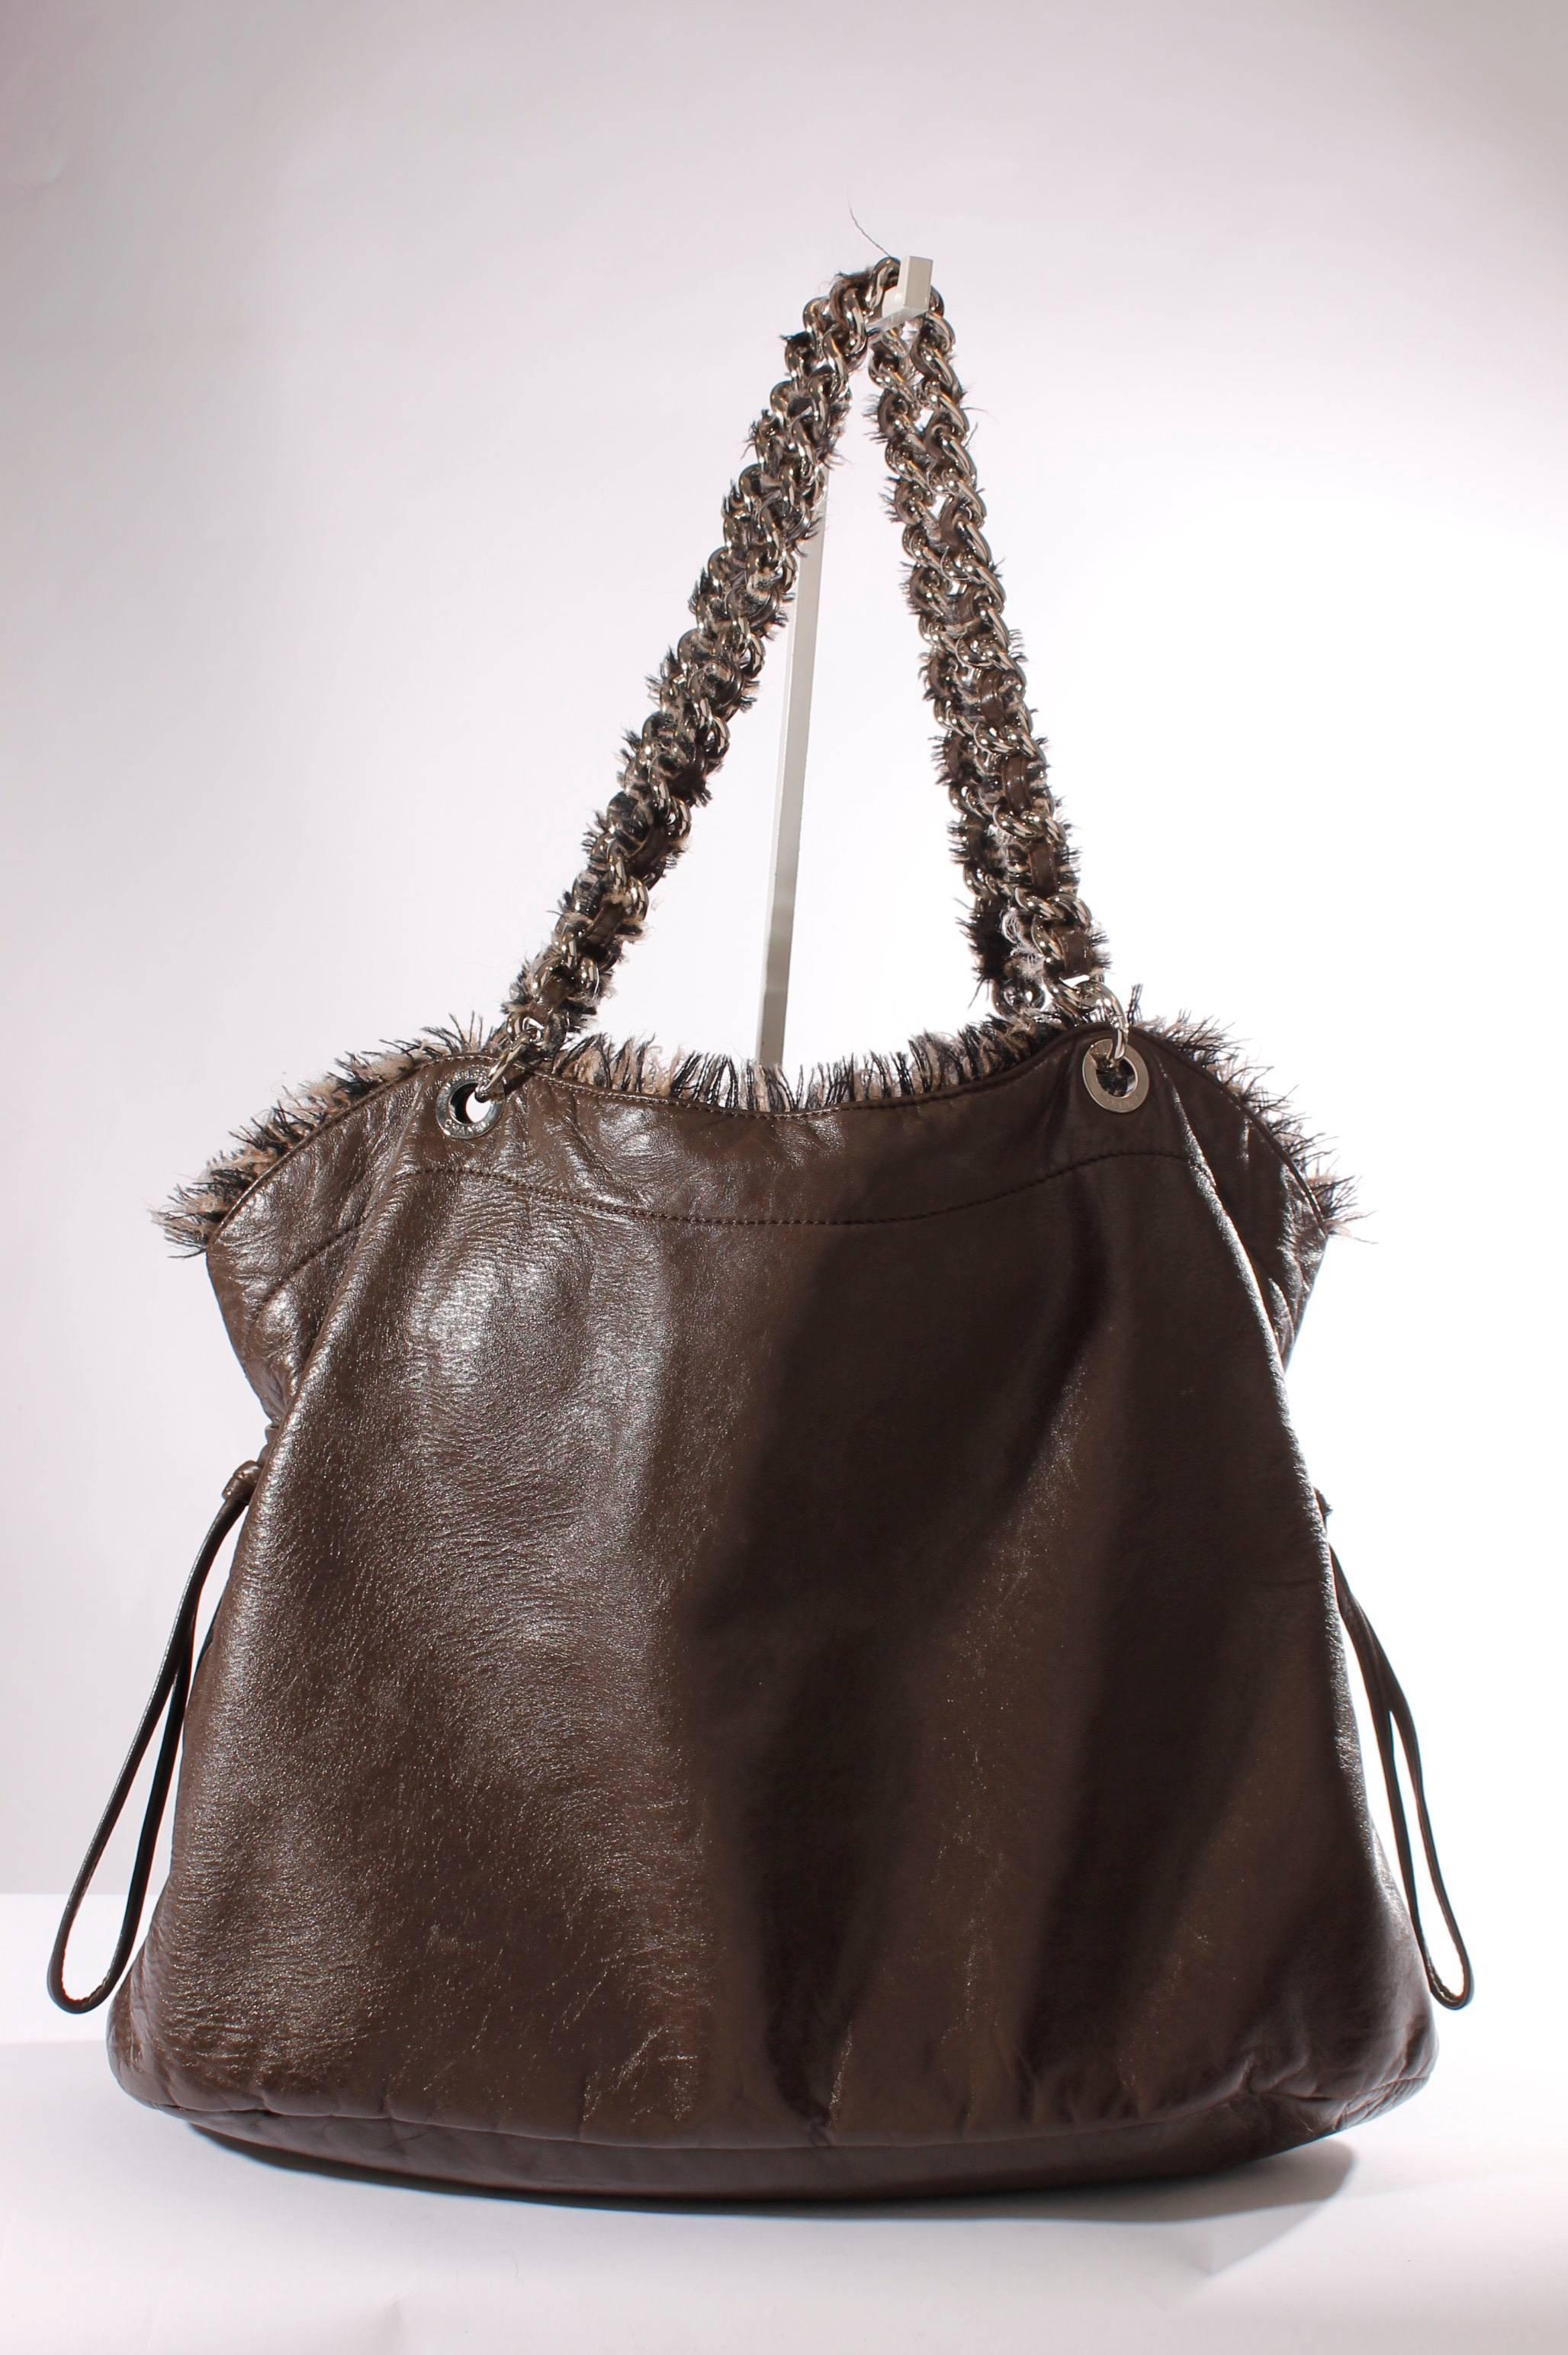 Soft and supple shopper by Chanel, this bag has a sturdy look!

This Chanel Shopper Ruffle Tote Bag is made of brown leather with ruffles in black and brown wool. Nice size; 42 centimeters wide and 31 centimeters high. Silver hardware.

The